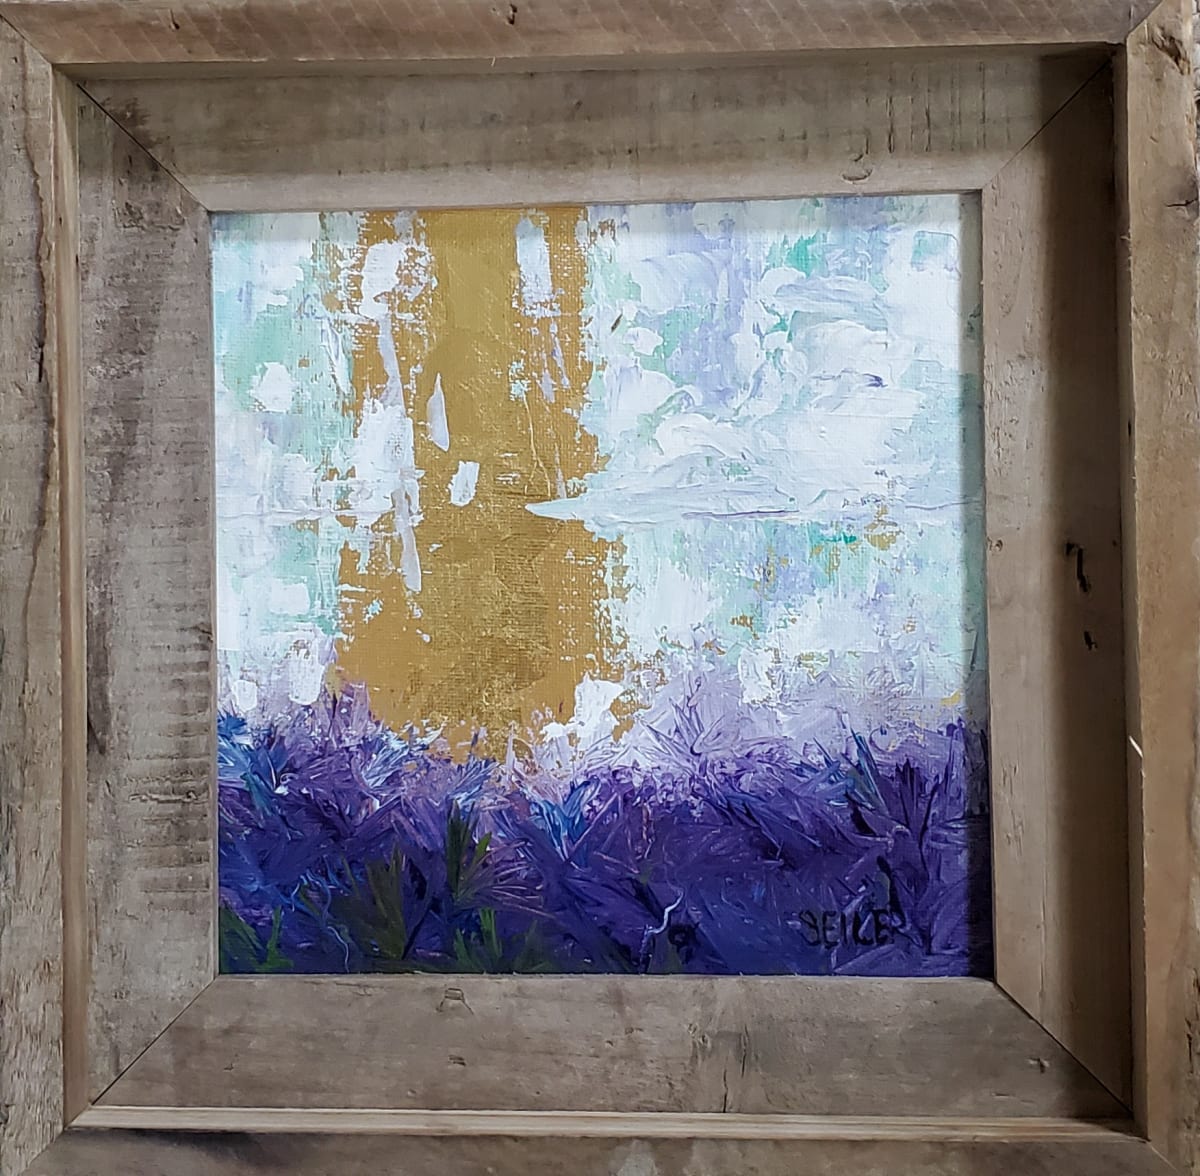 Teter Toter by Jill Seiler  Image: We played outside everyday, all day. Gold leaf and purple make me so happy